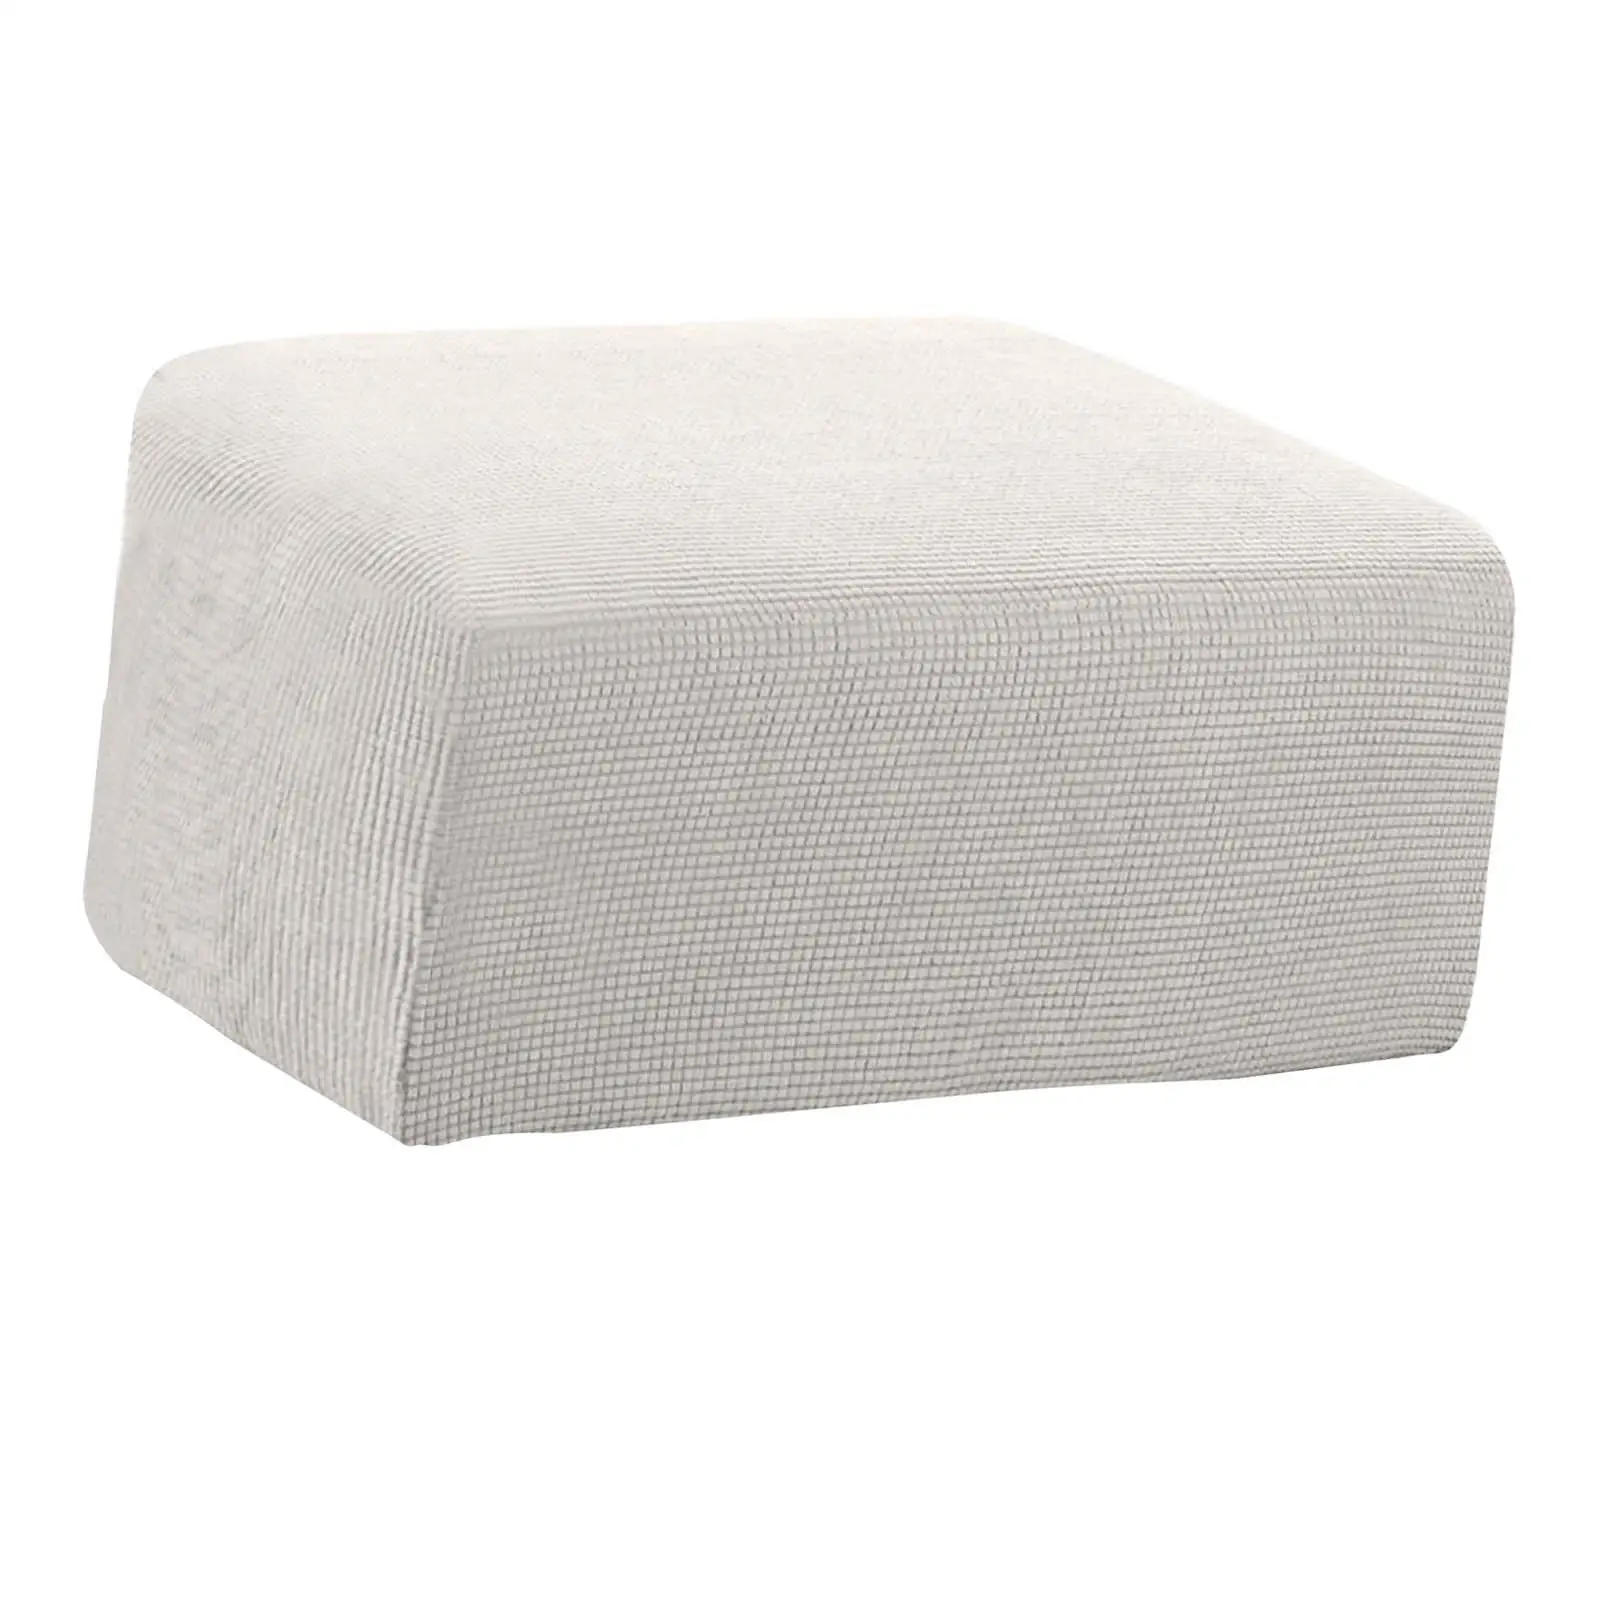 High Stretch Ottoman Cover Rectangle Footrest Cover Machine Washable with Elastic Bottom Rectangle Storage Stool Slipcovers